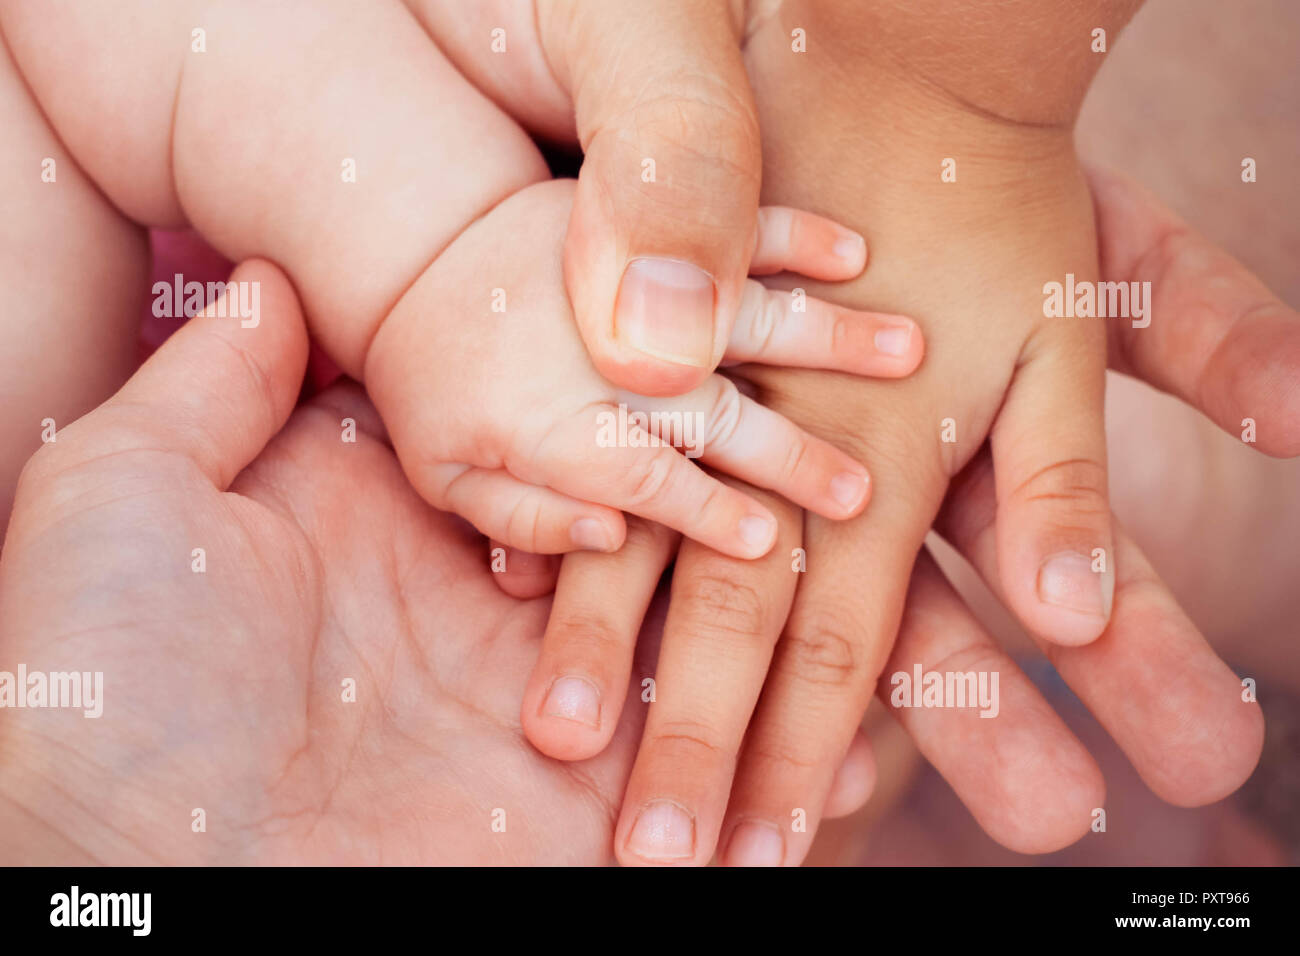 Best Each Four Hands Other Touching Royalty-Free Images, Stock